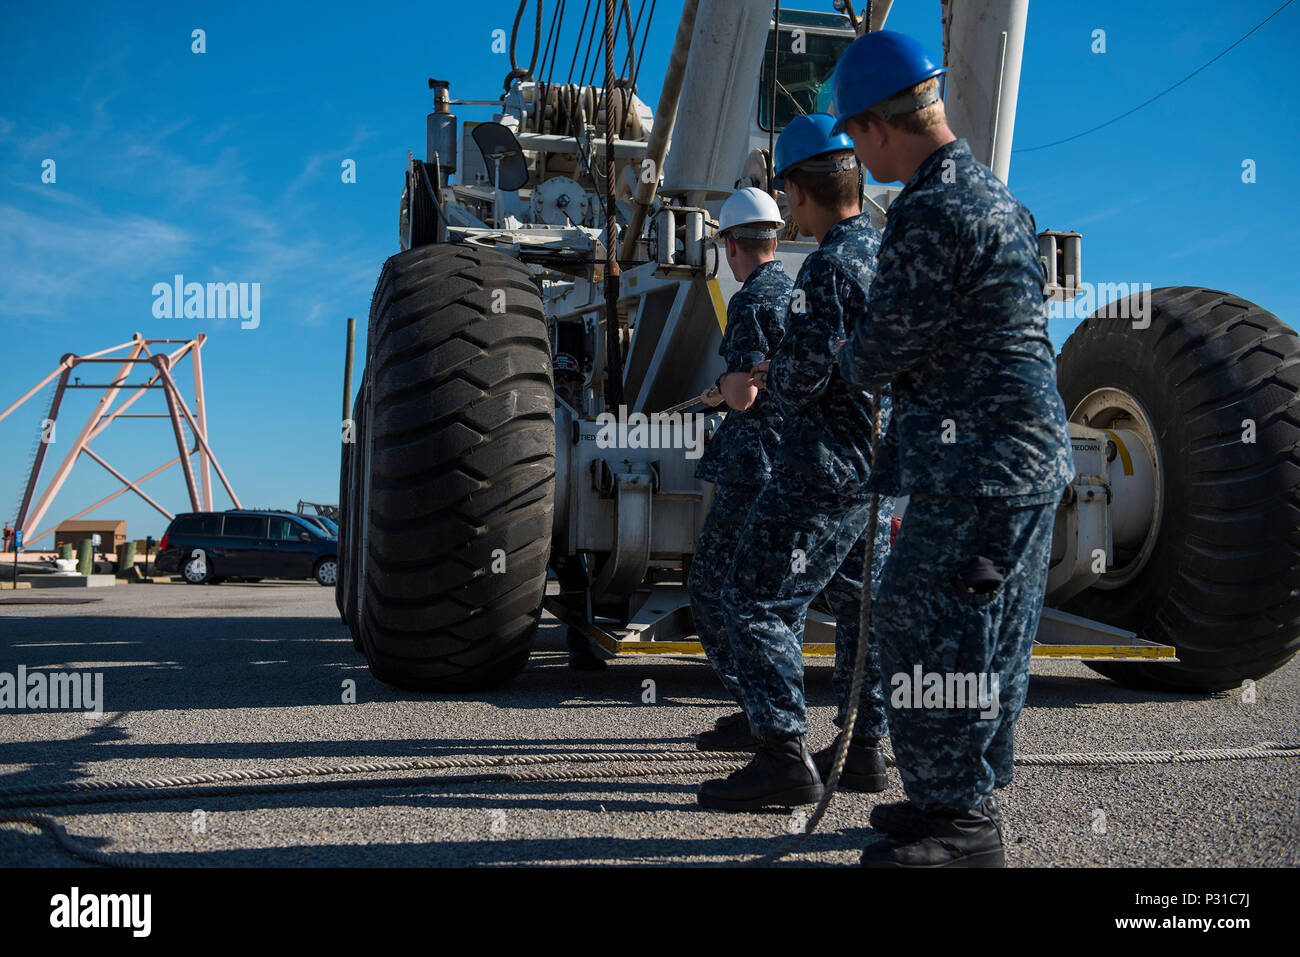 160822-N-FV405-187 NORFOLK, Va. (Aug. 22, 2016) Sailors steady tending lines in preparation to move the mobile crash crane during its offload from aircraft carrier USS Harry S. Truman (CVN 75). Truman recently returned to its homeport at Naval Station Norfolk, completing an 8-month deployment to the U.S. 5th and 6th Fleet areas of operations. (U.S. Navy photo by Mass Communication Specialist Seaman Victoria Granado/Released) Stock Photo